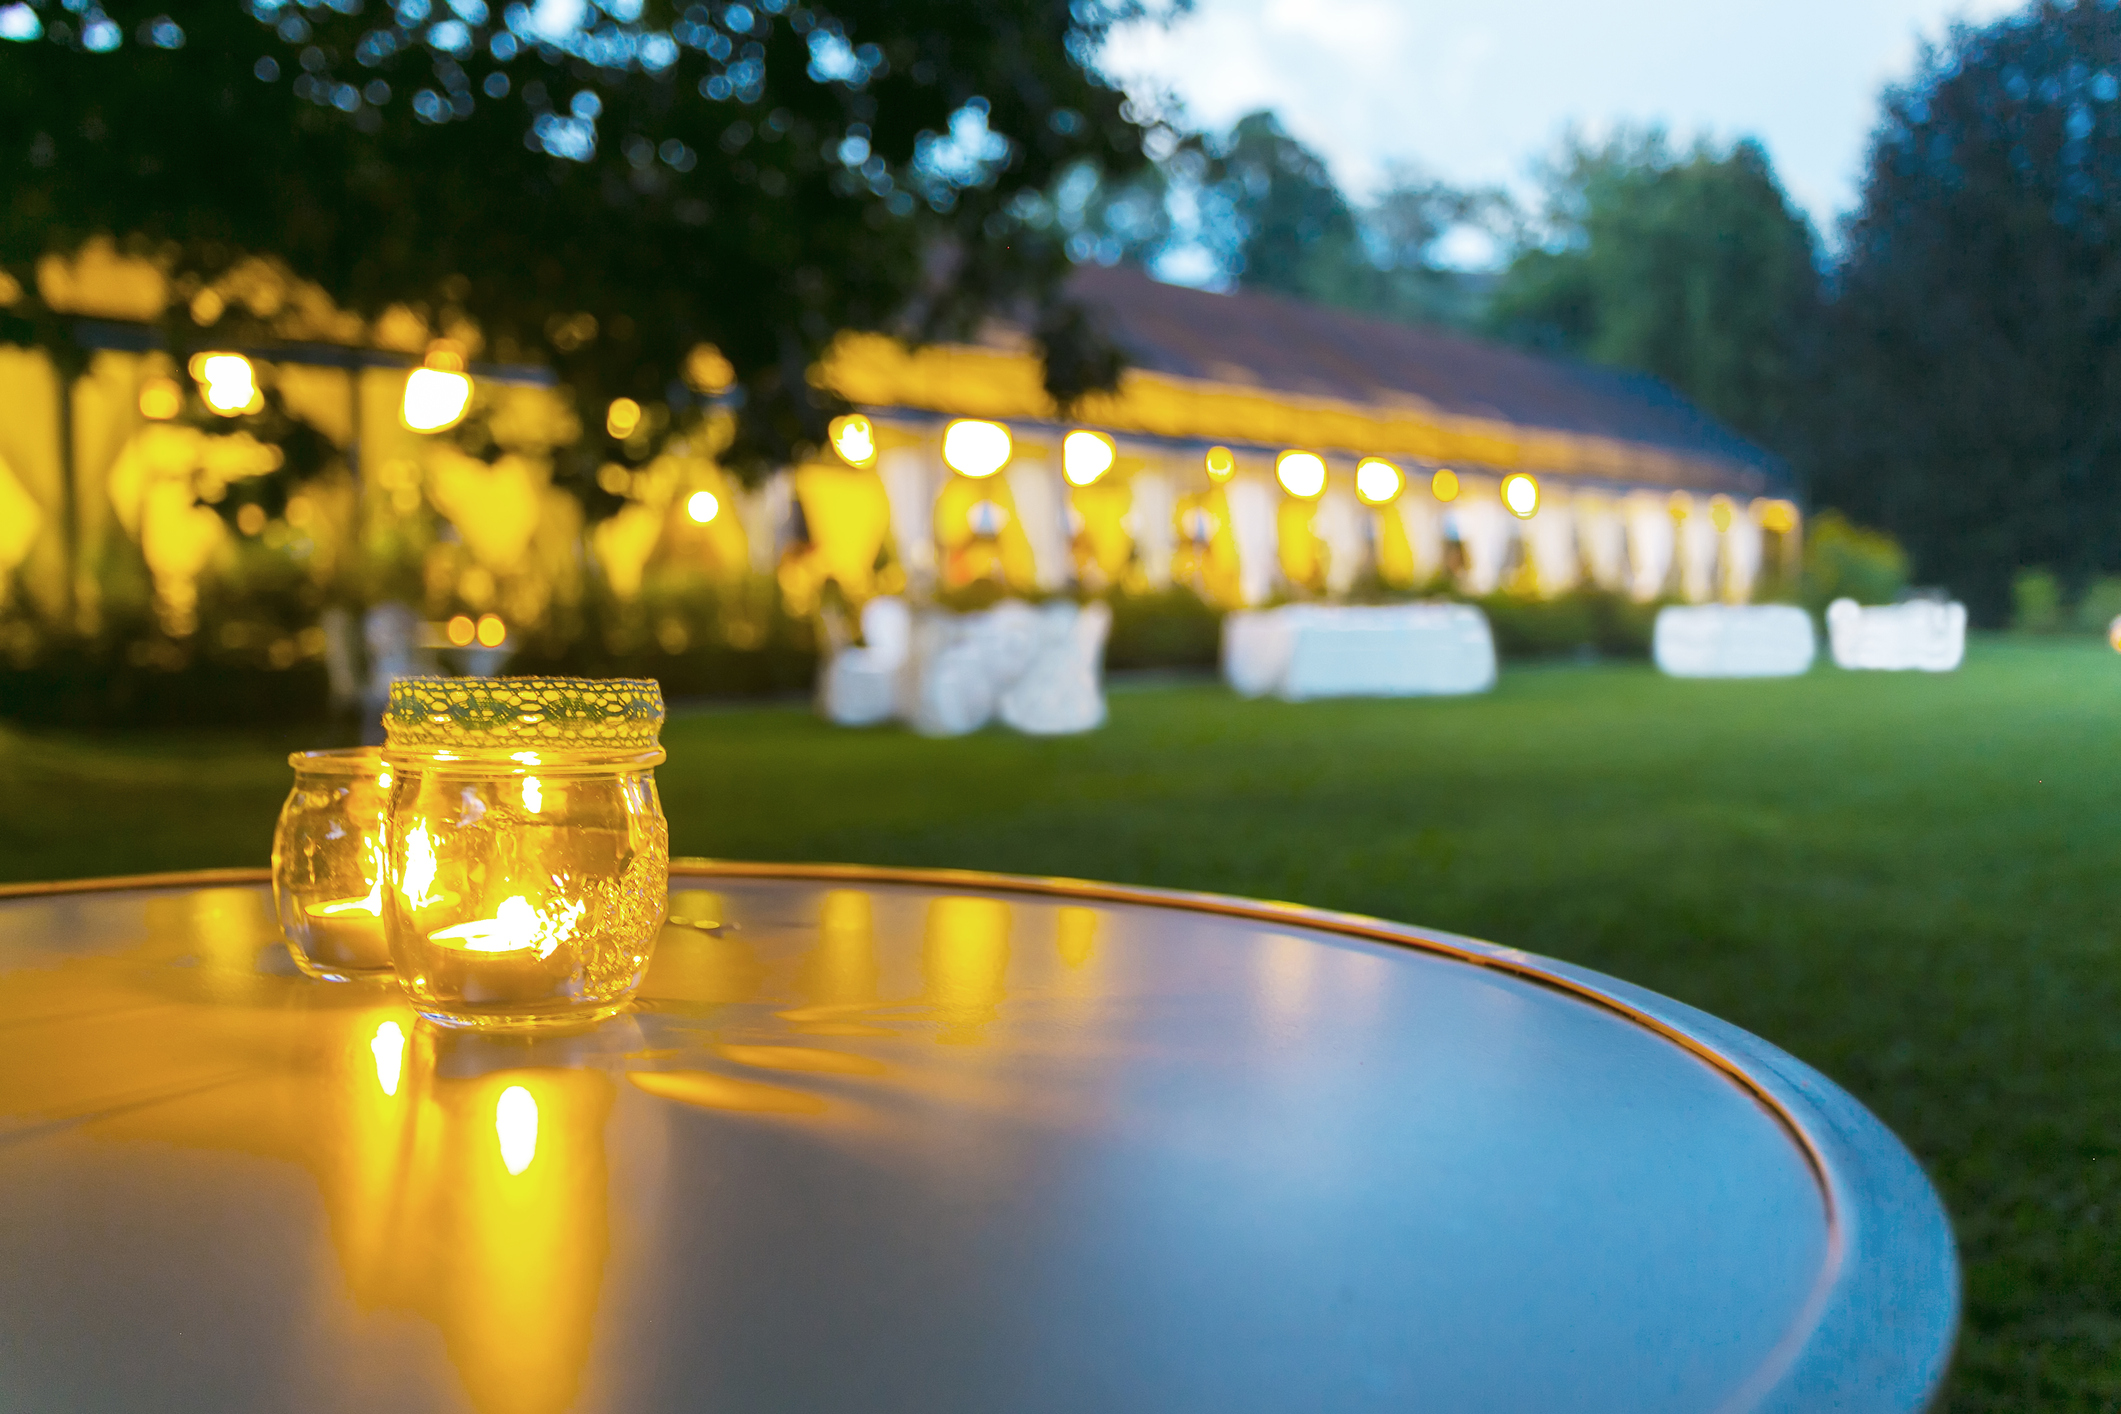 outdoor table setting at wedding reception